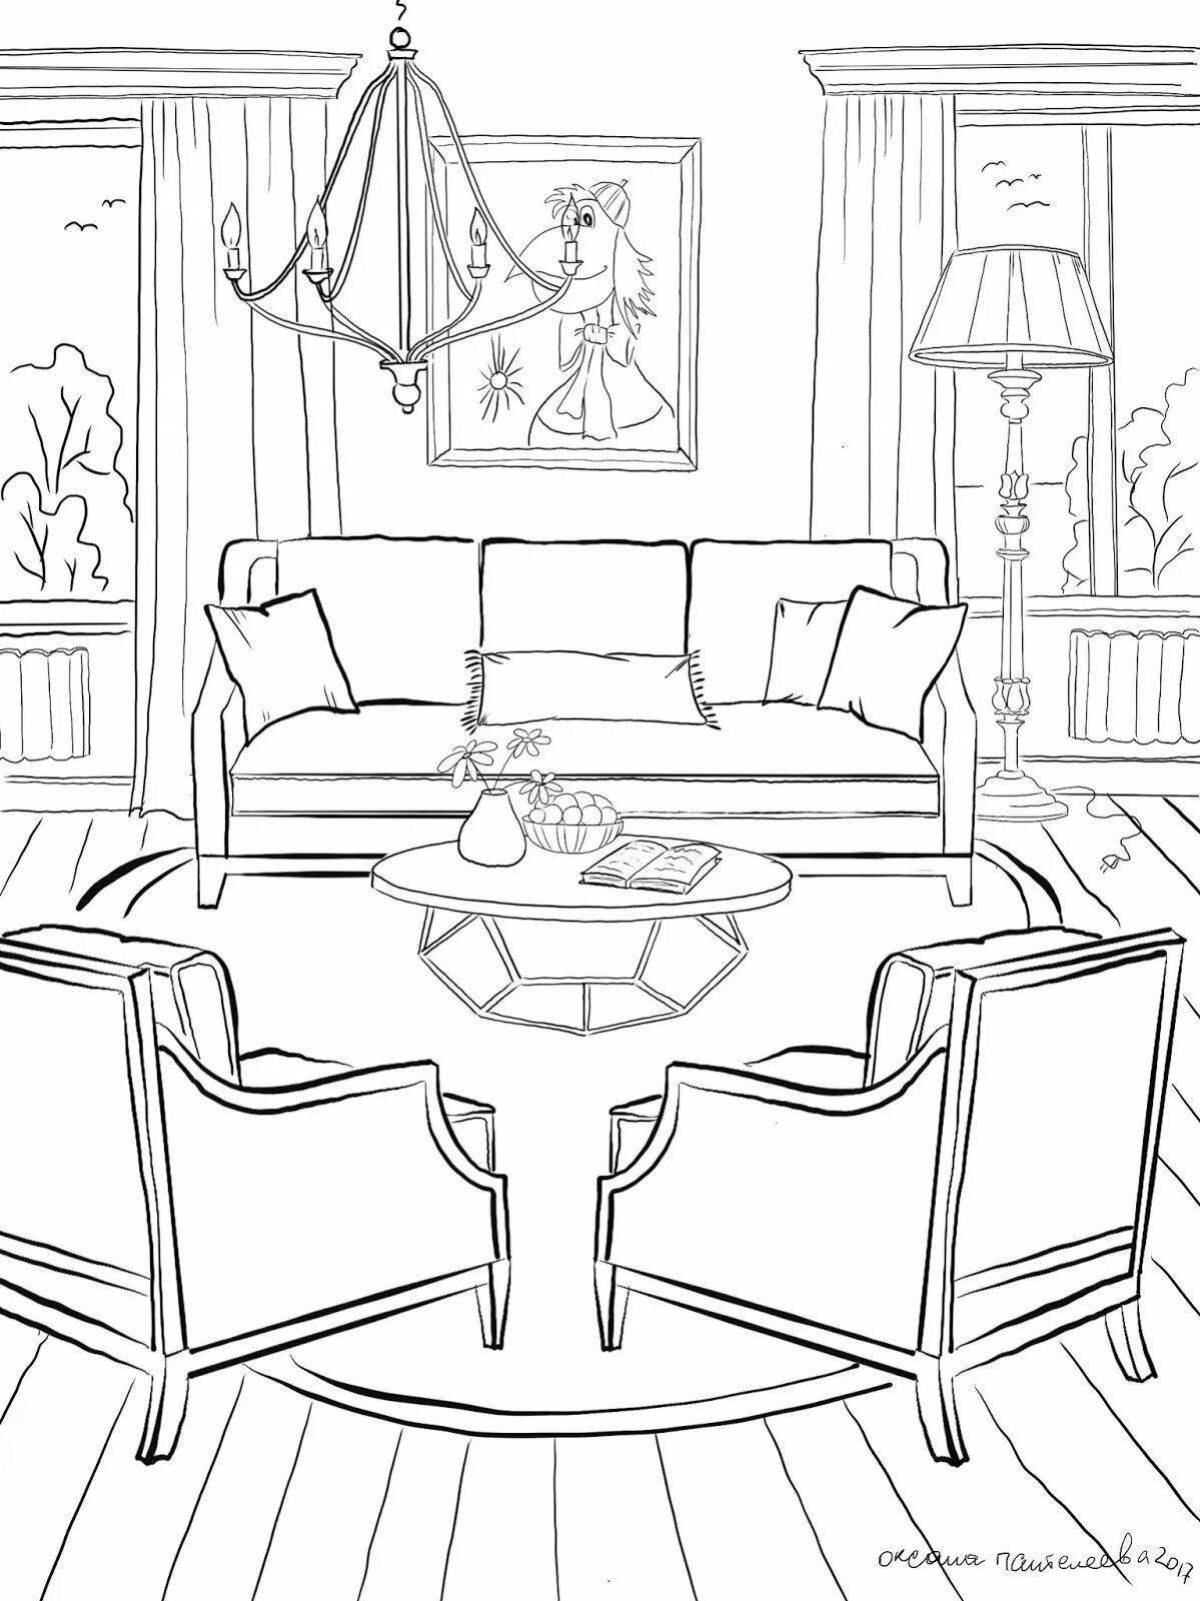 Children's living room coloring book